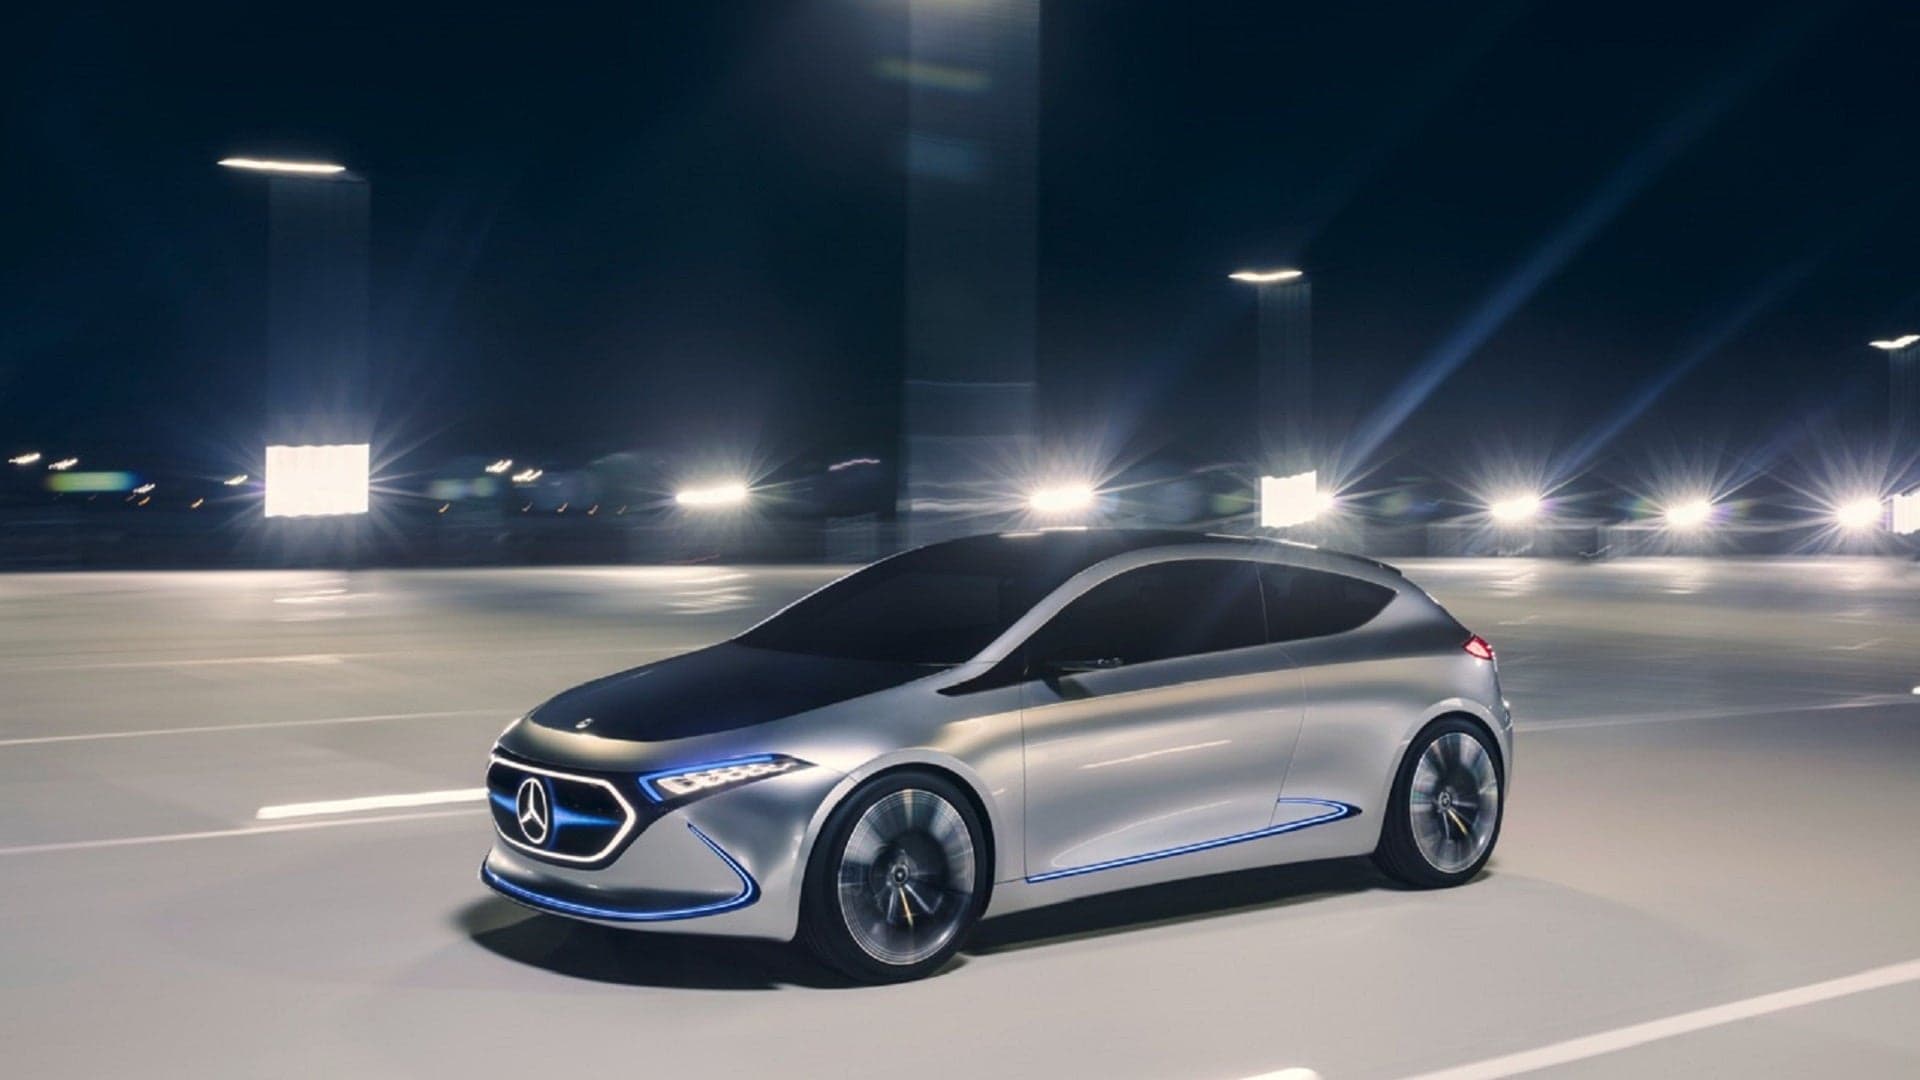 Daimler Will Invest Nearly $600 Million in French Electric Car Plant